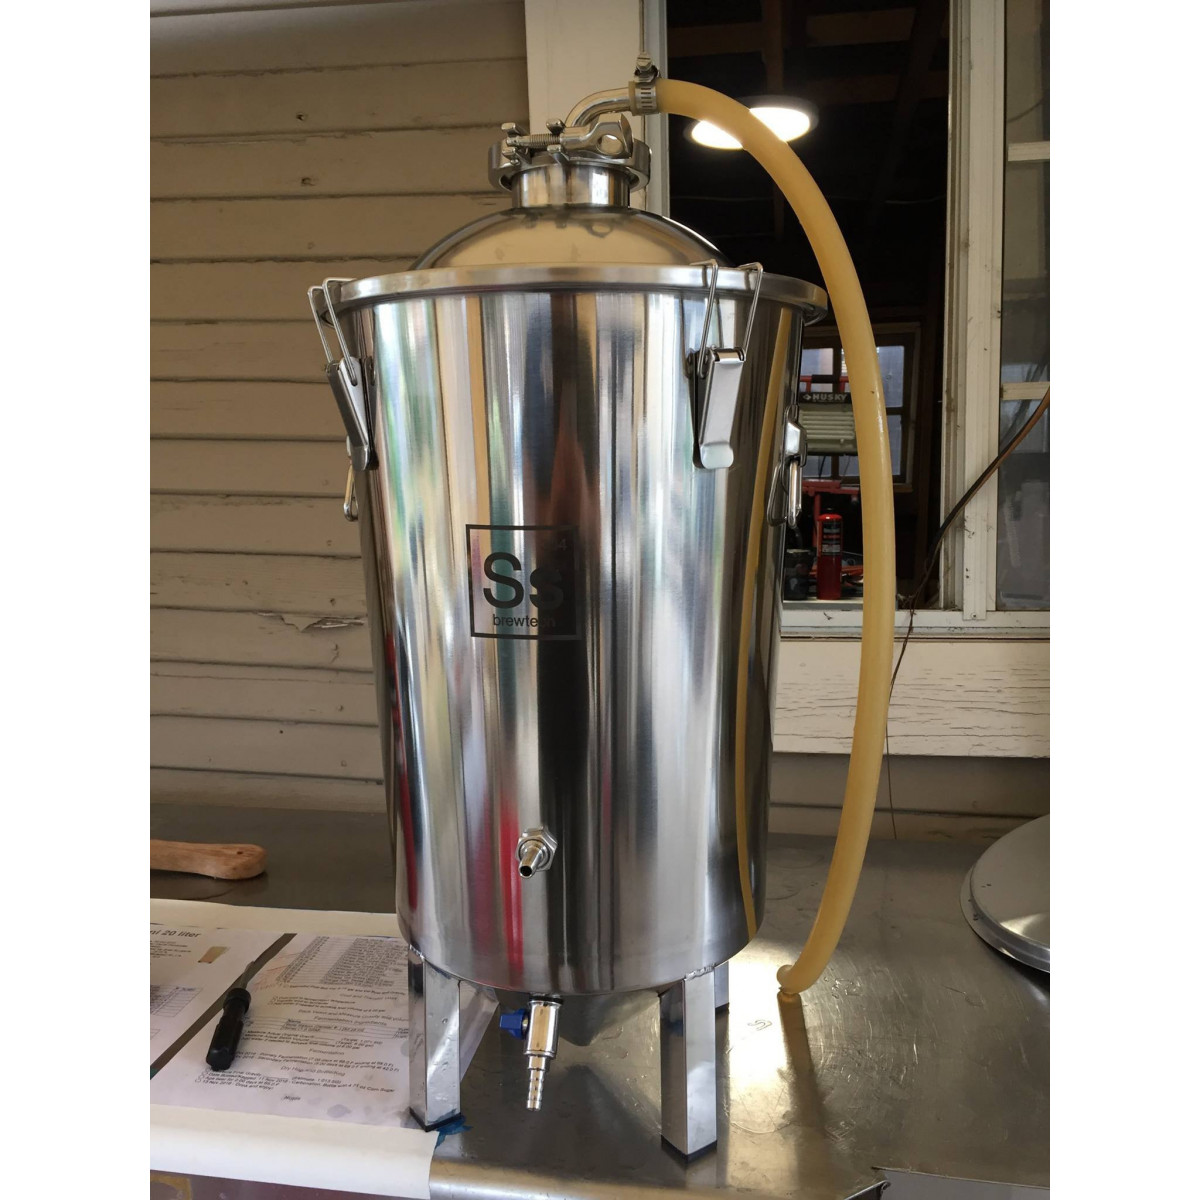 Ss Brewtech™ Lid  for Chronical/Brew Bucket 27 l (7 gal) domed with 3" TC